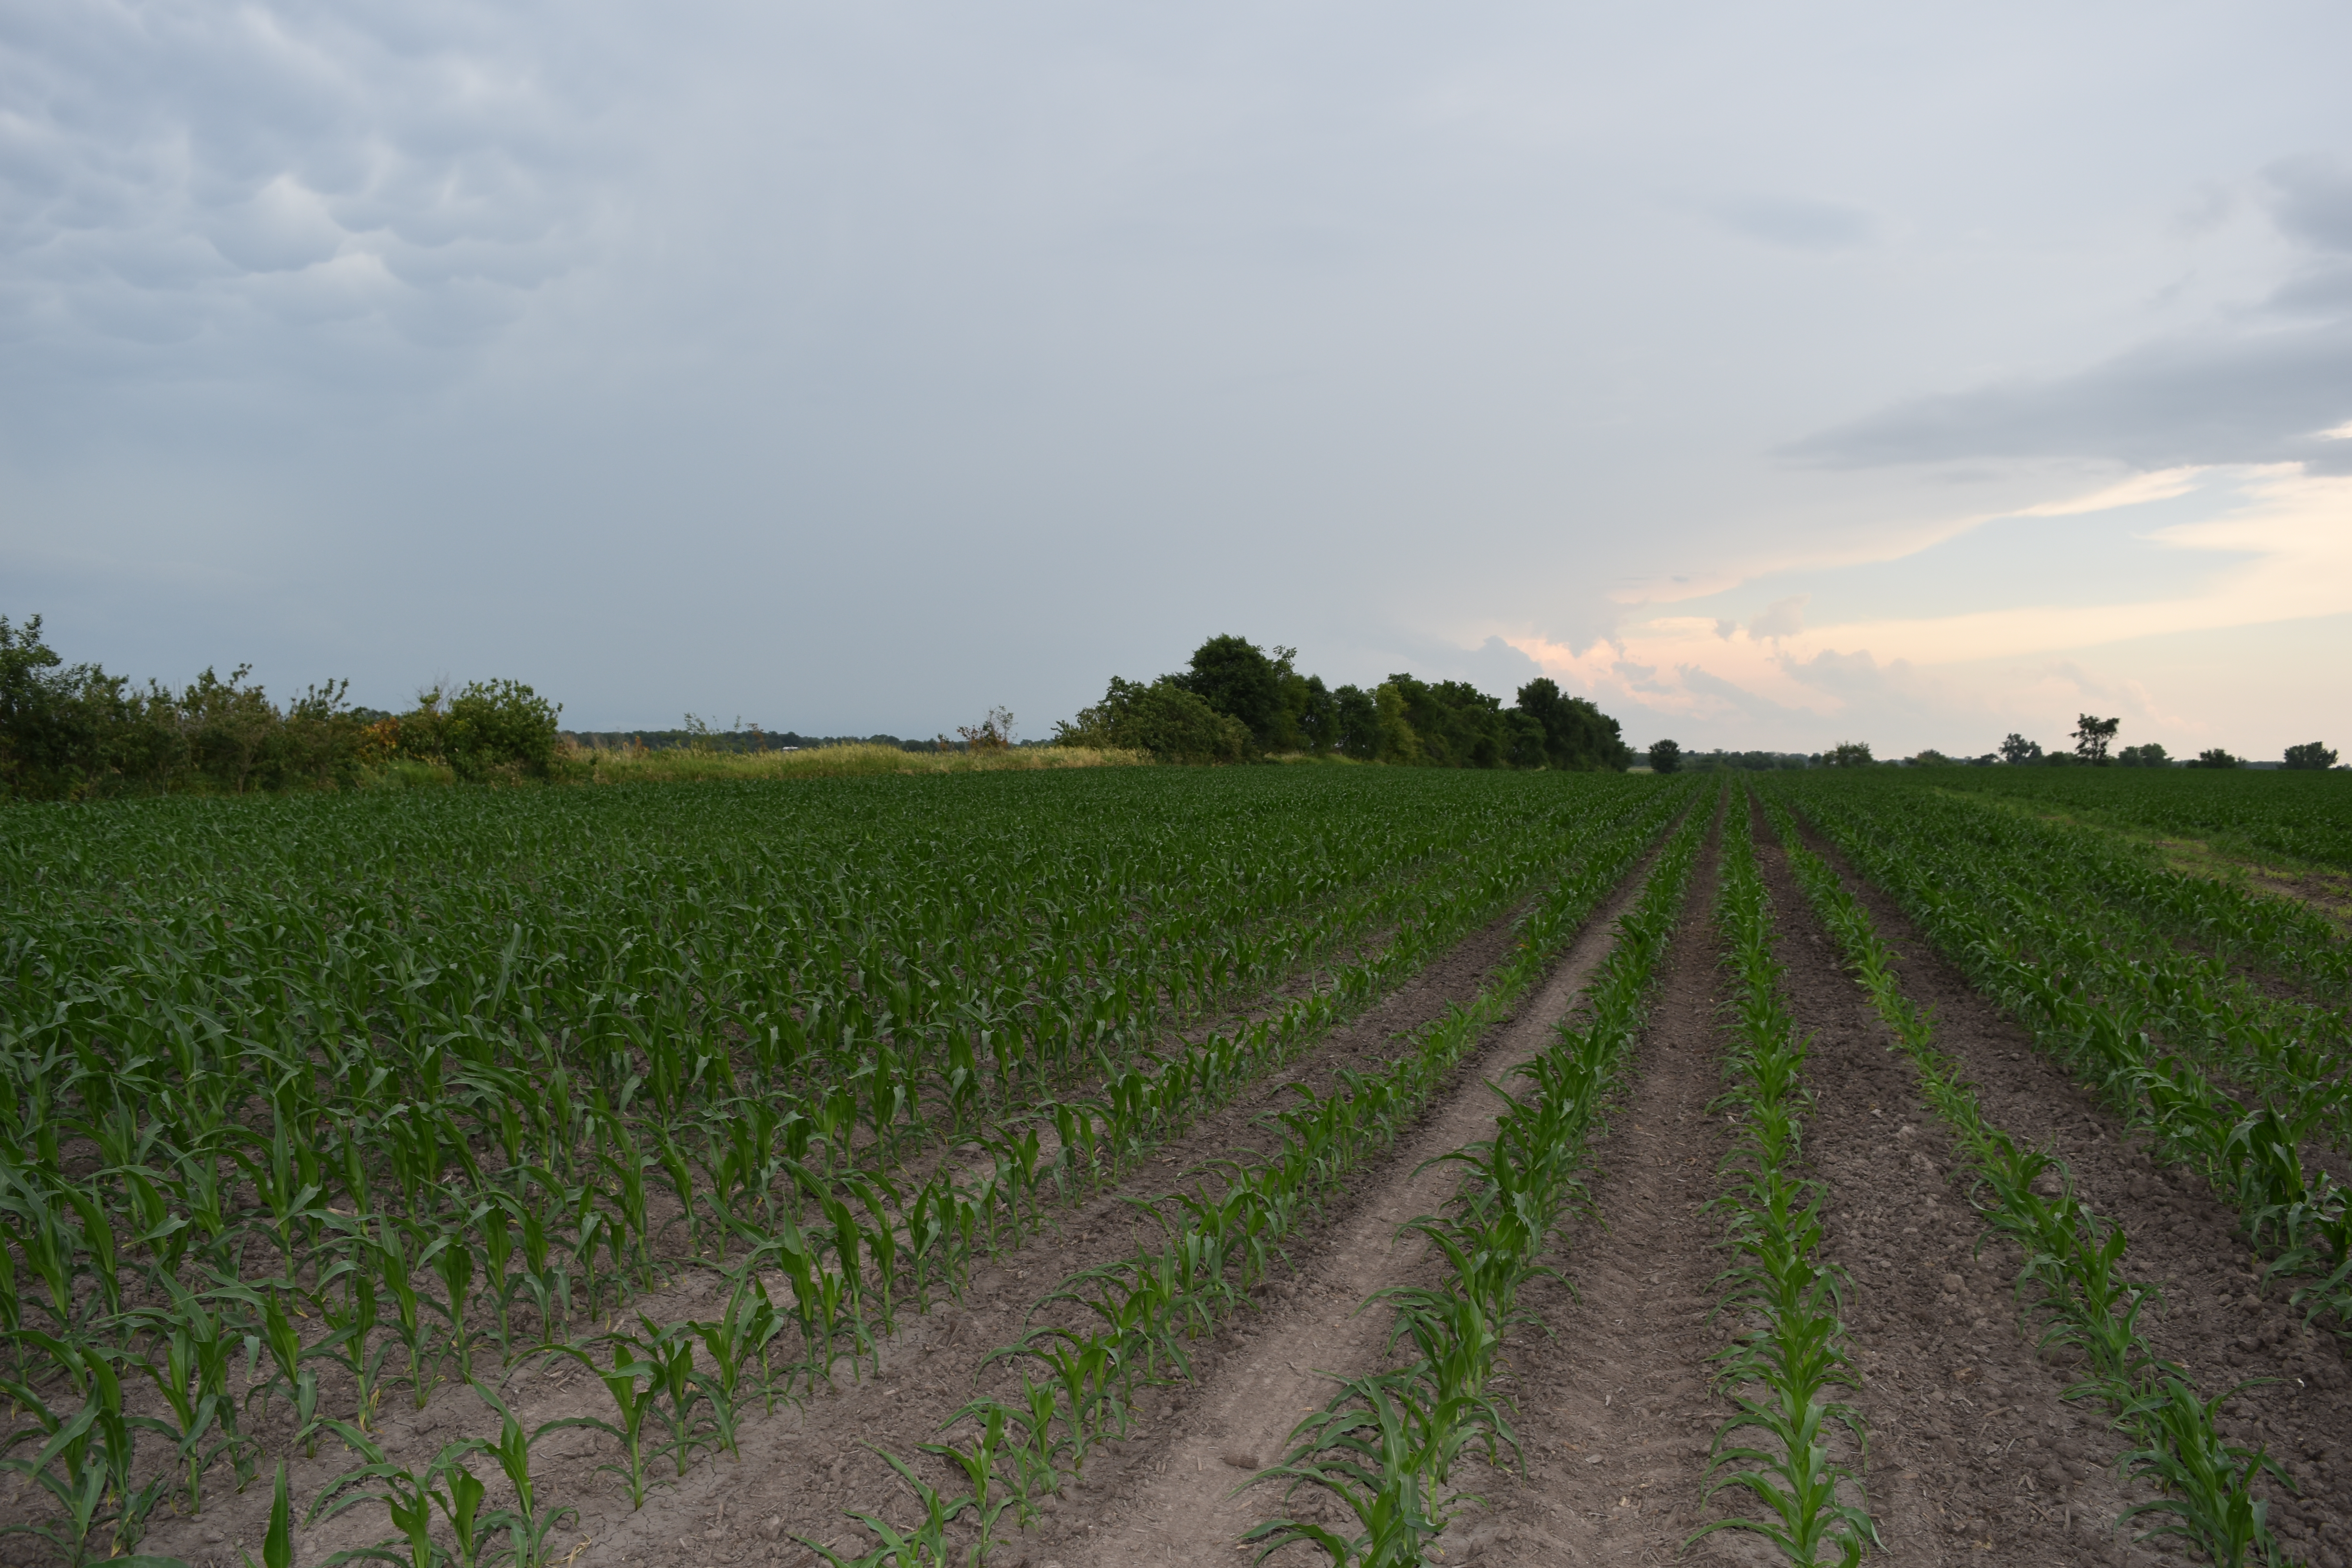 This agronomic image shows corn in a field.